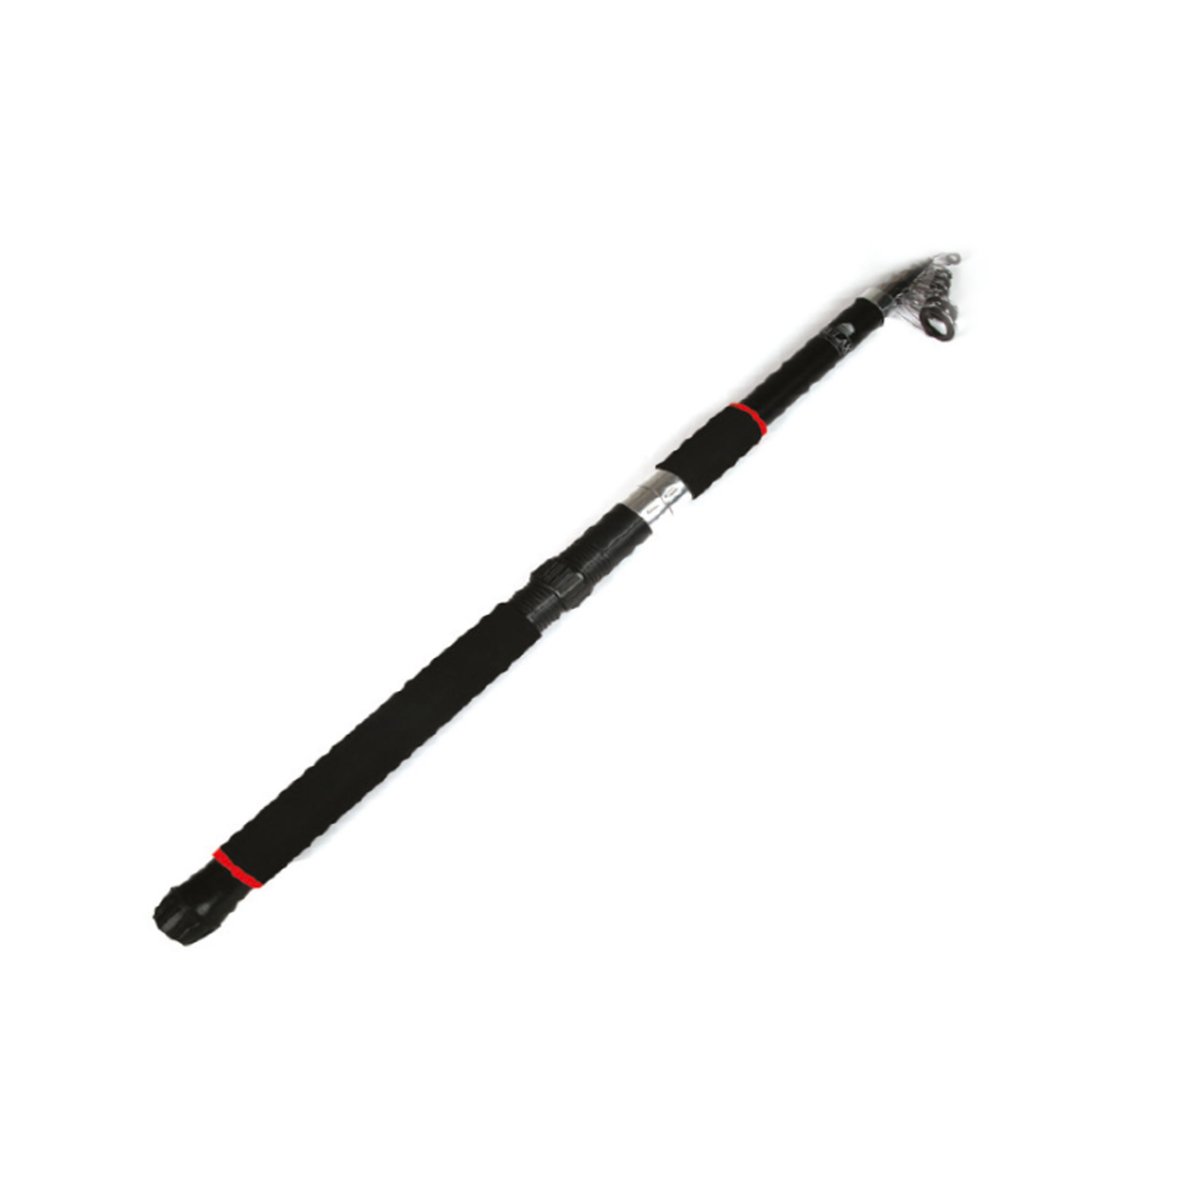 Relax Fishing Rod 7990033 2.7mtr Online at Best Price, Fishing Rods